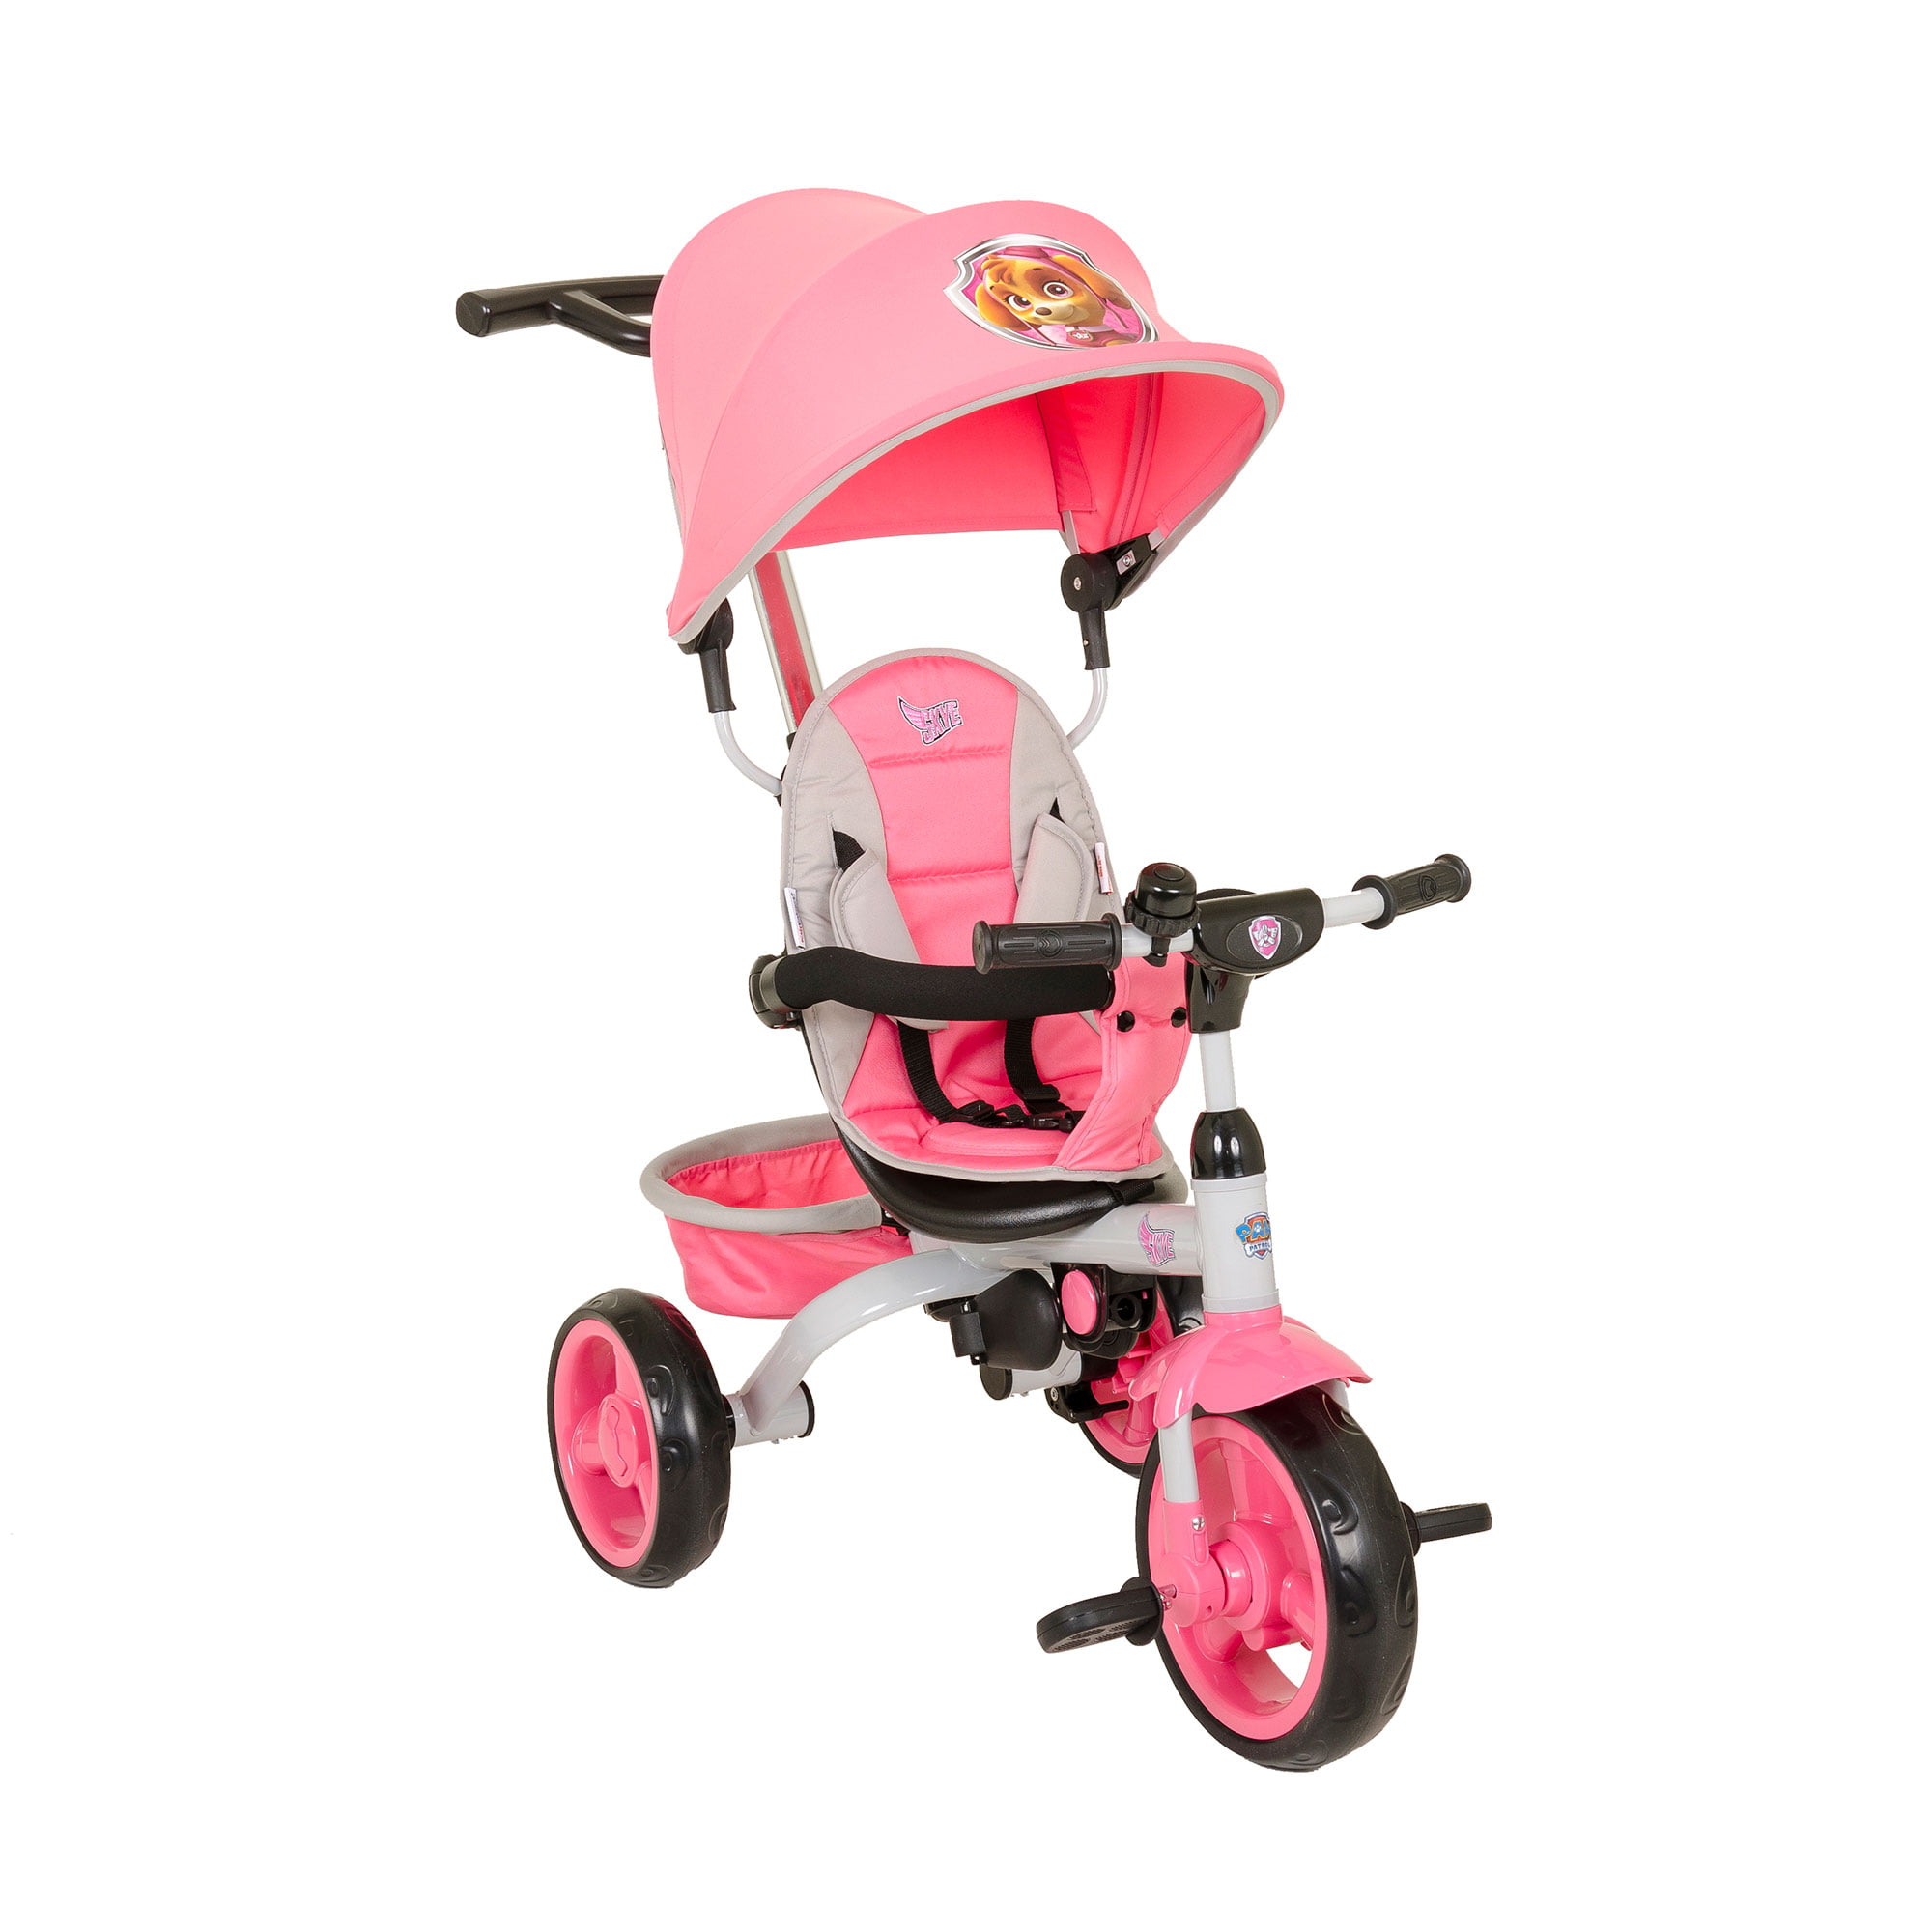 little tikes 4-in-1 trike ride on, pink/purple, sports edition 